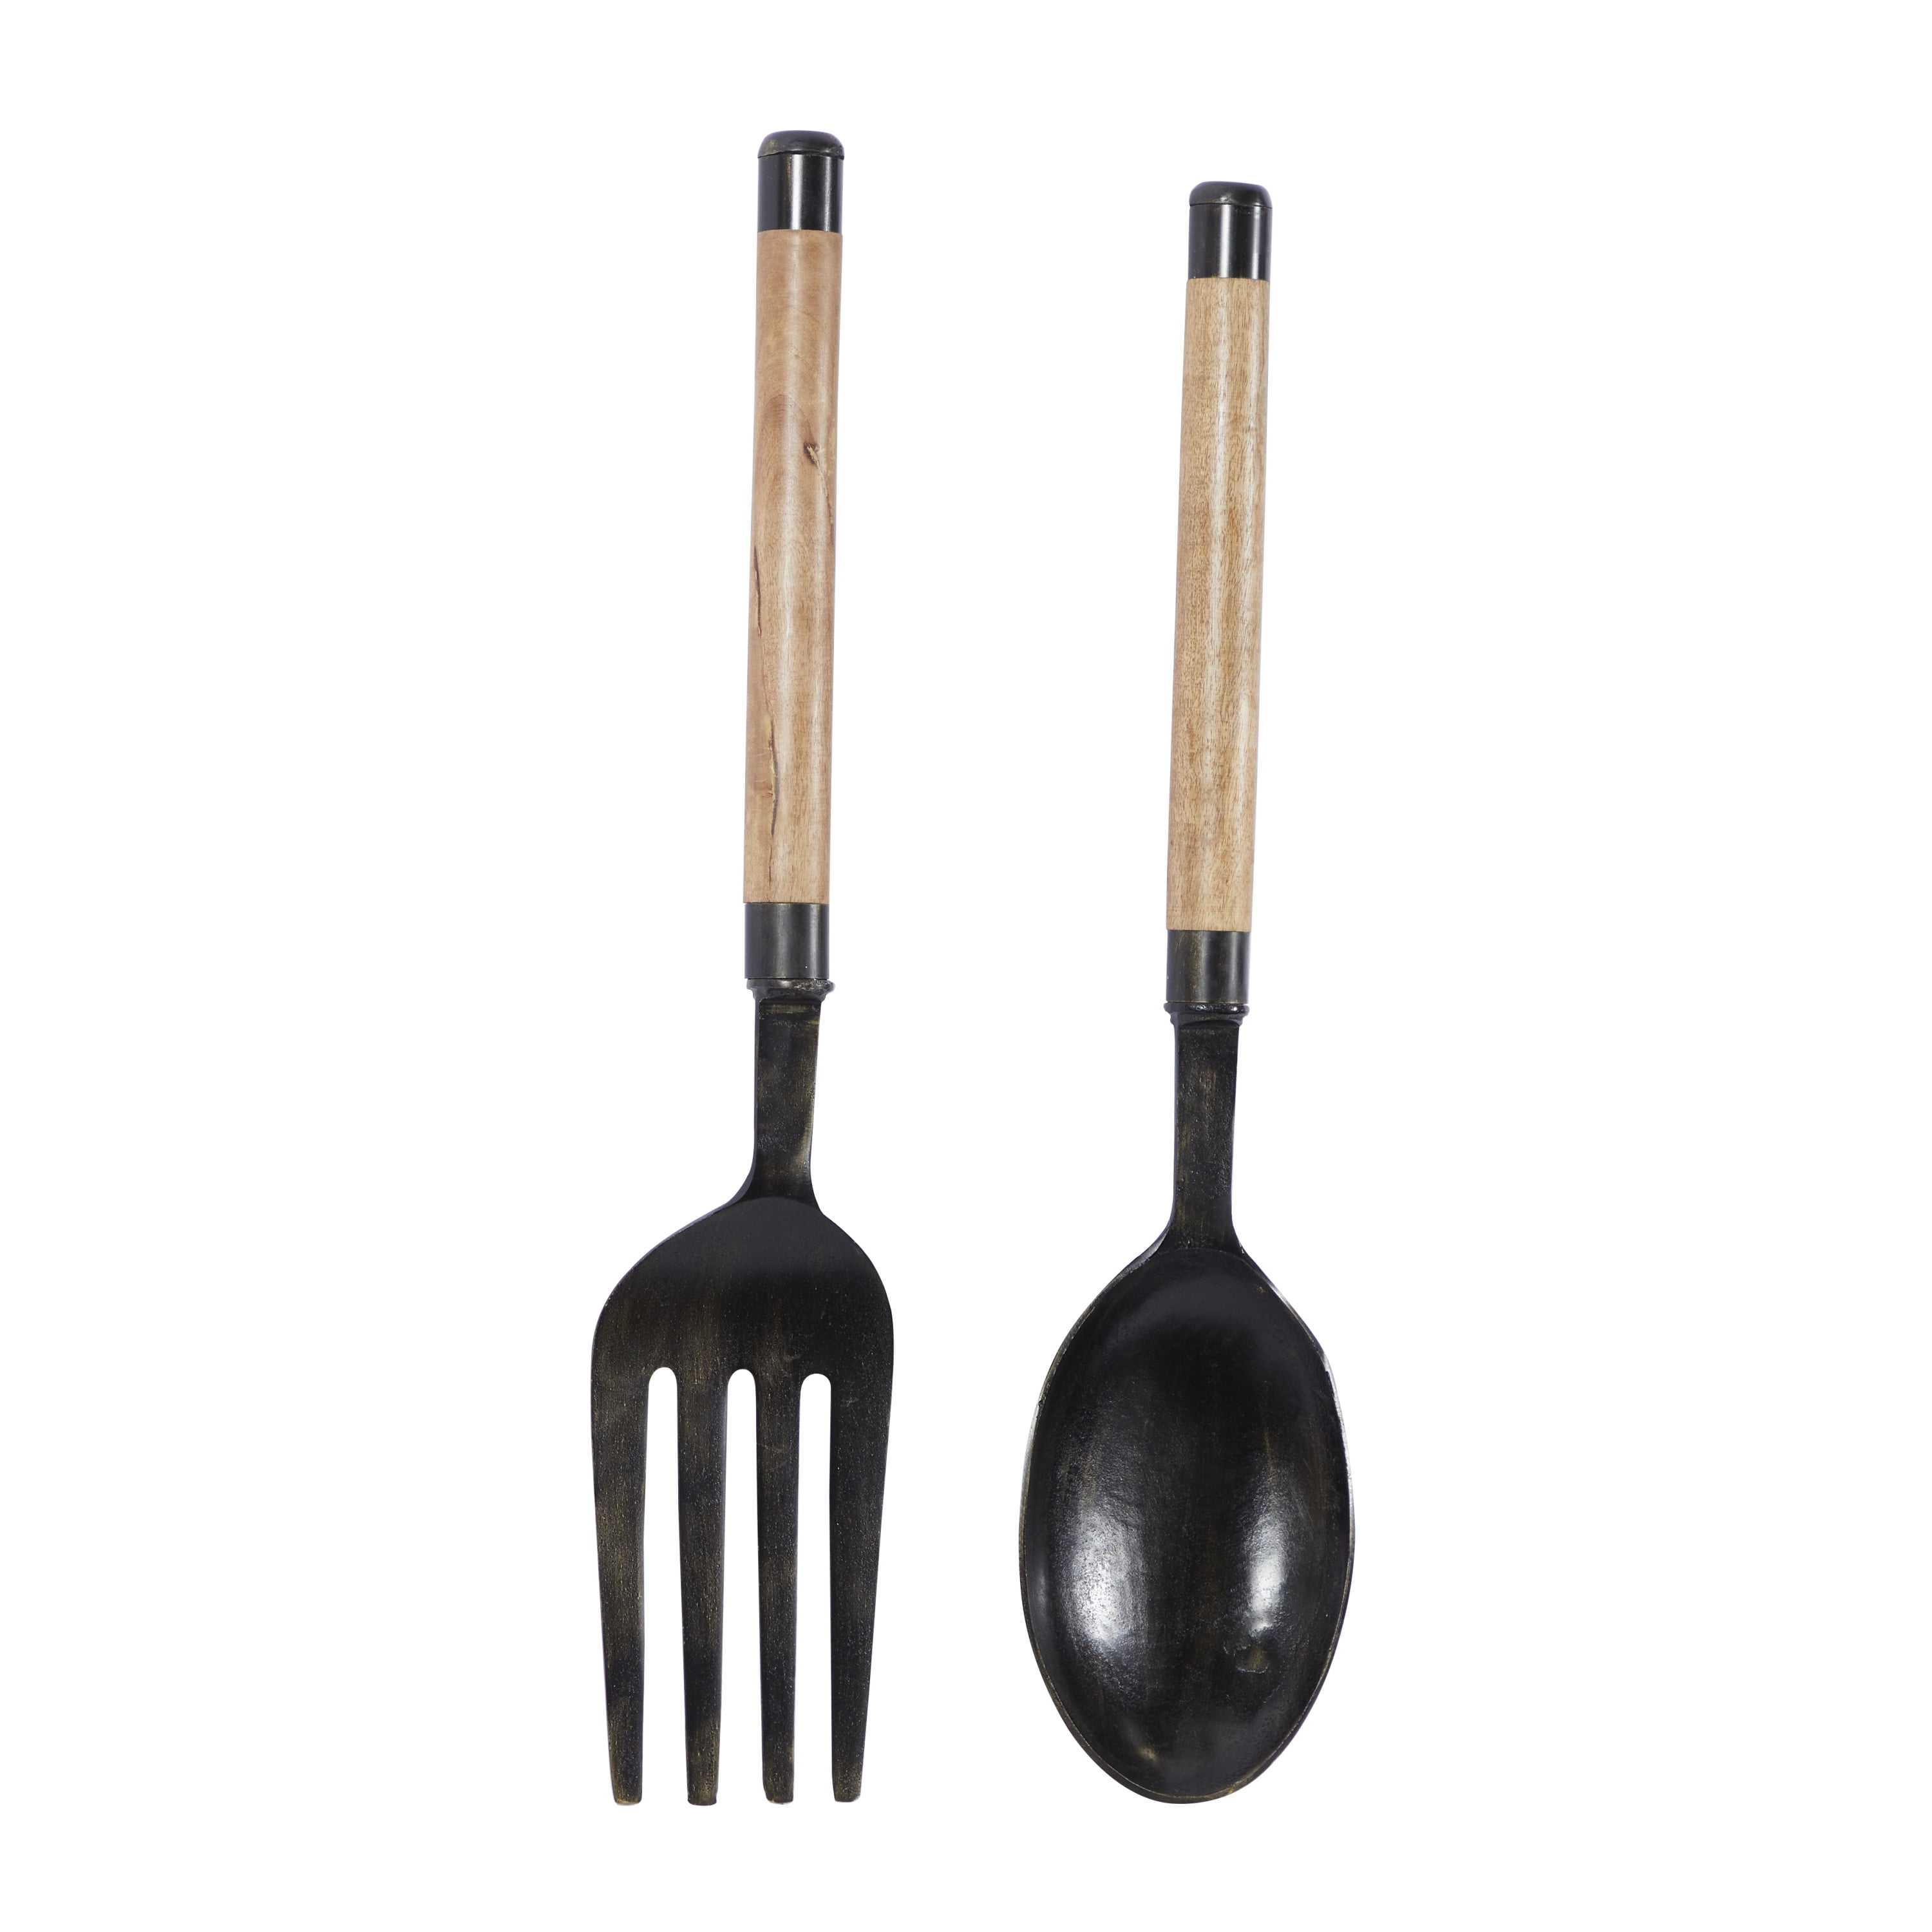 Black Aluminum Spoon and Fork Utensils Wall Decor Set of 2 8W, 35H